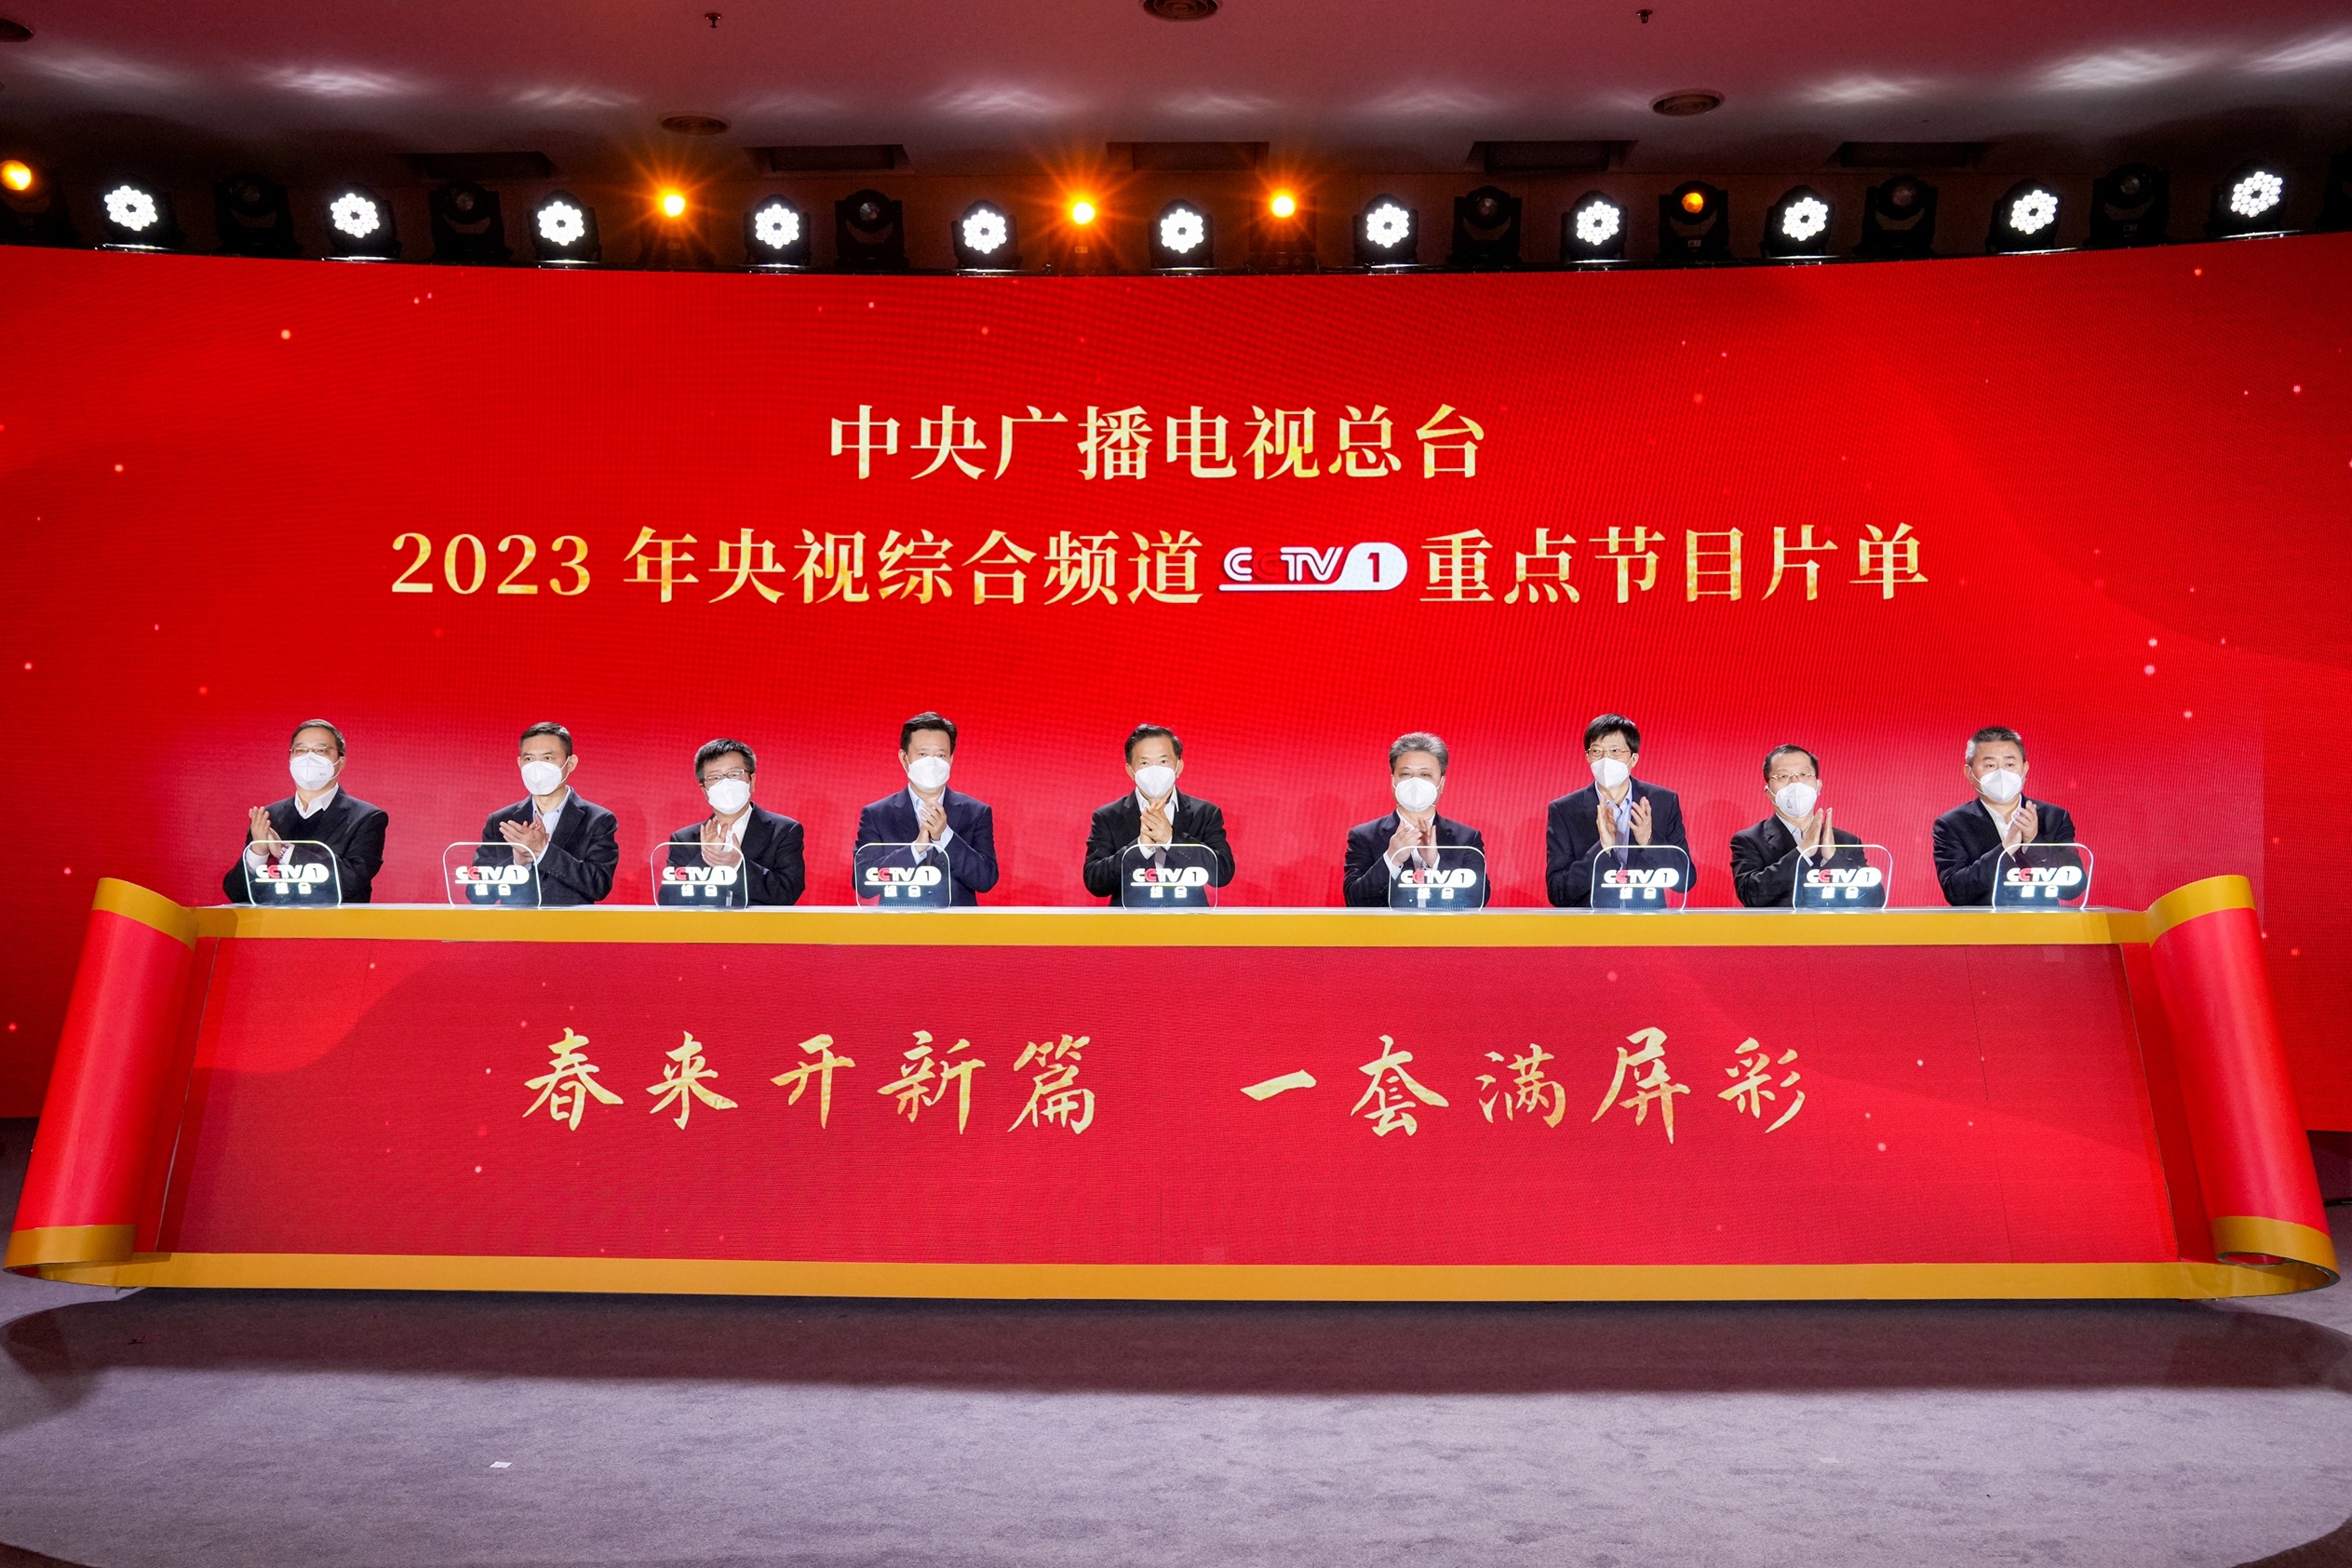 China Media Group held a release ceremony on the 2023 major program series list in Beijing, January 18, 2023. /CMG